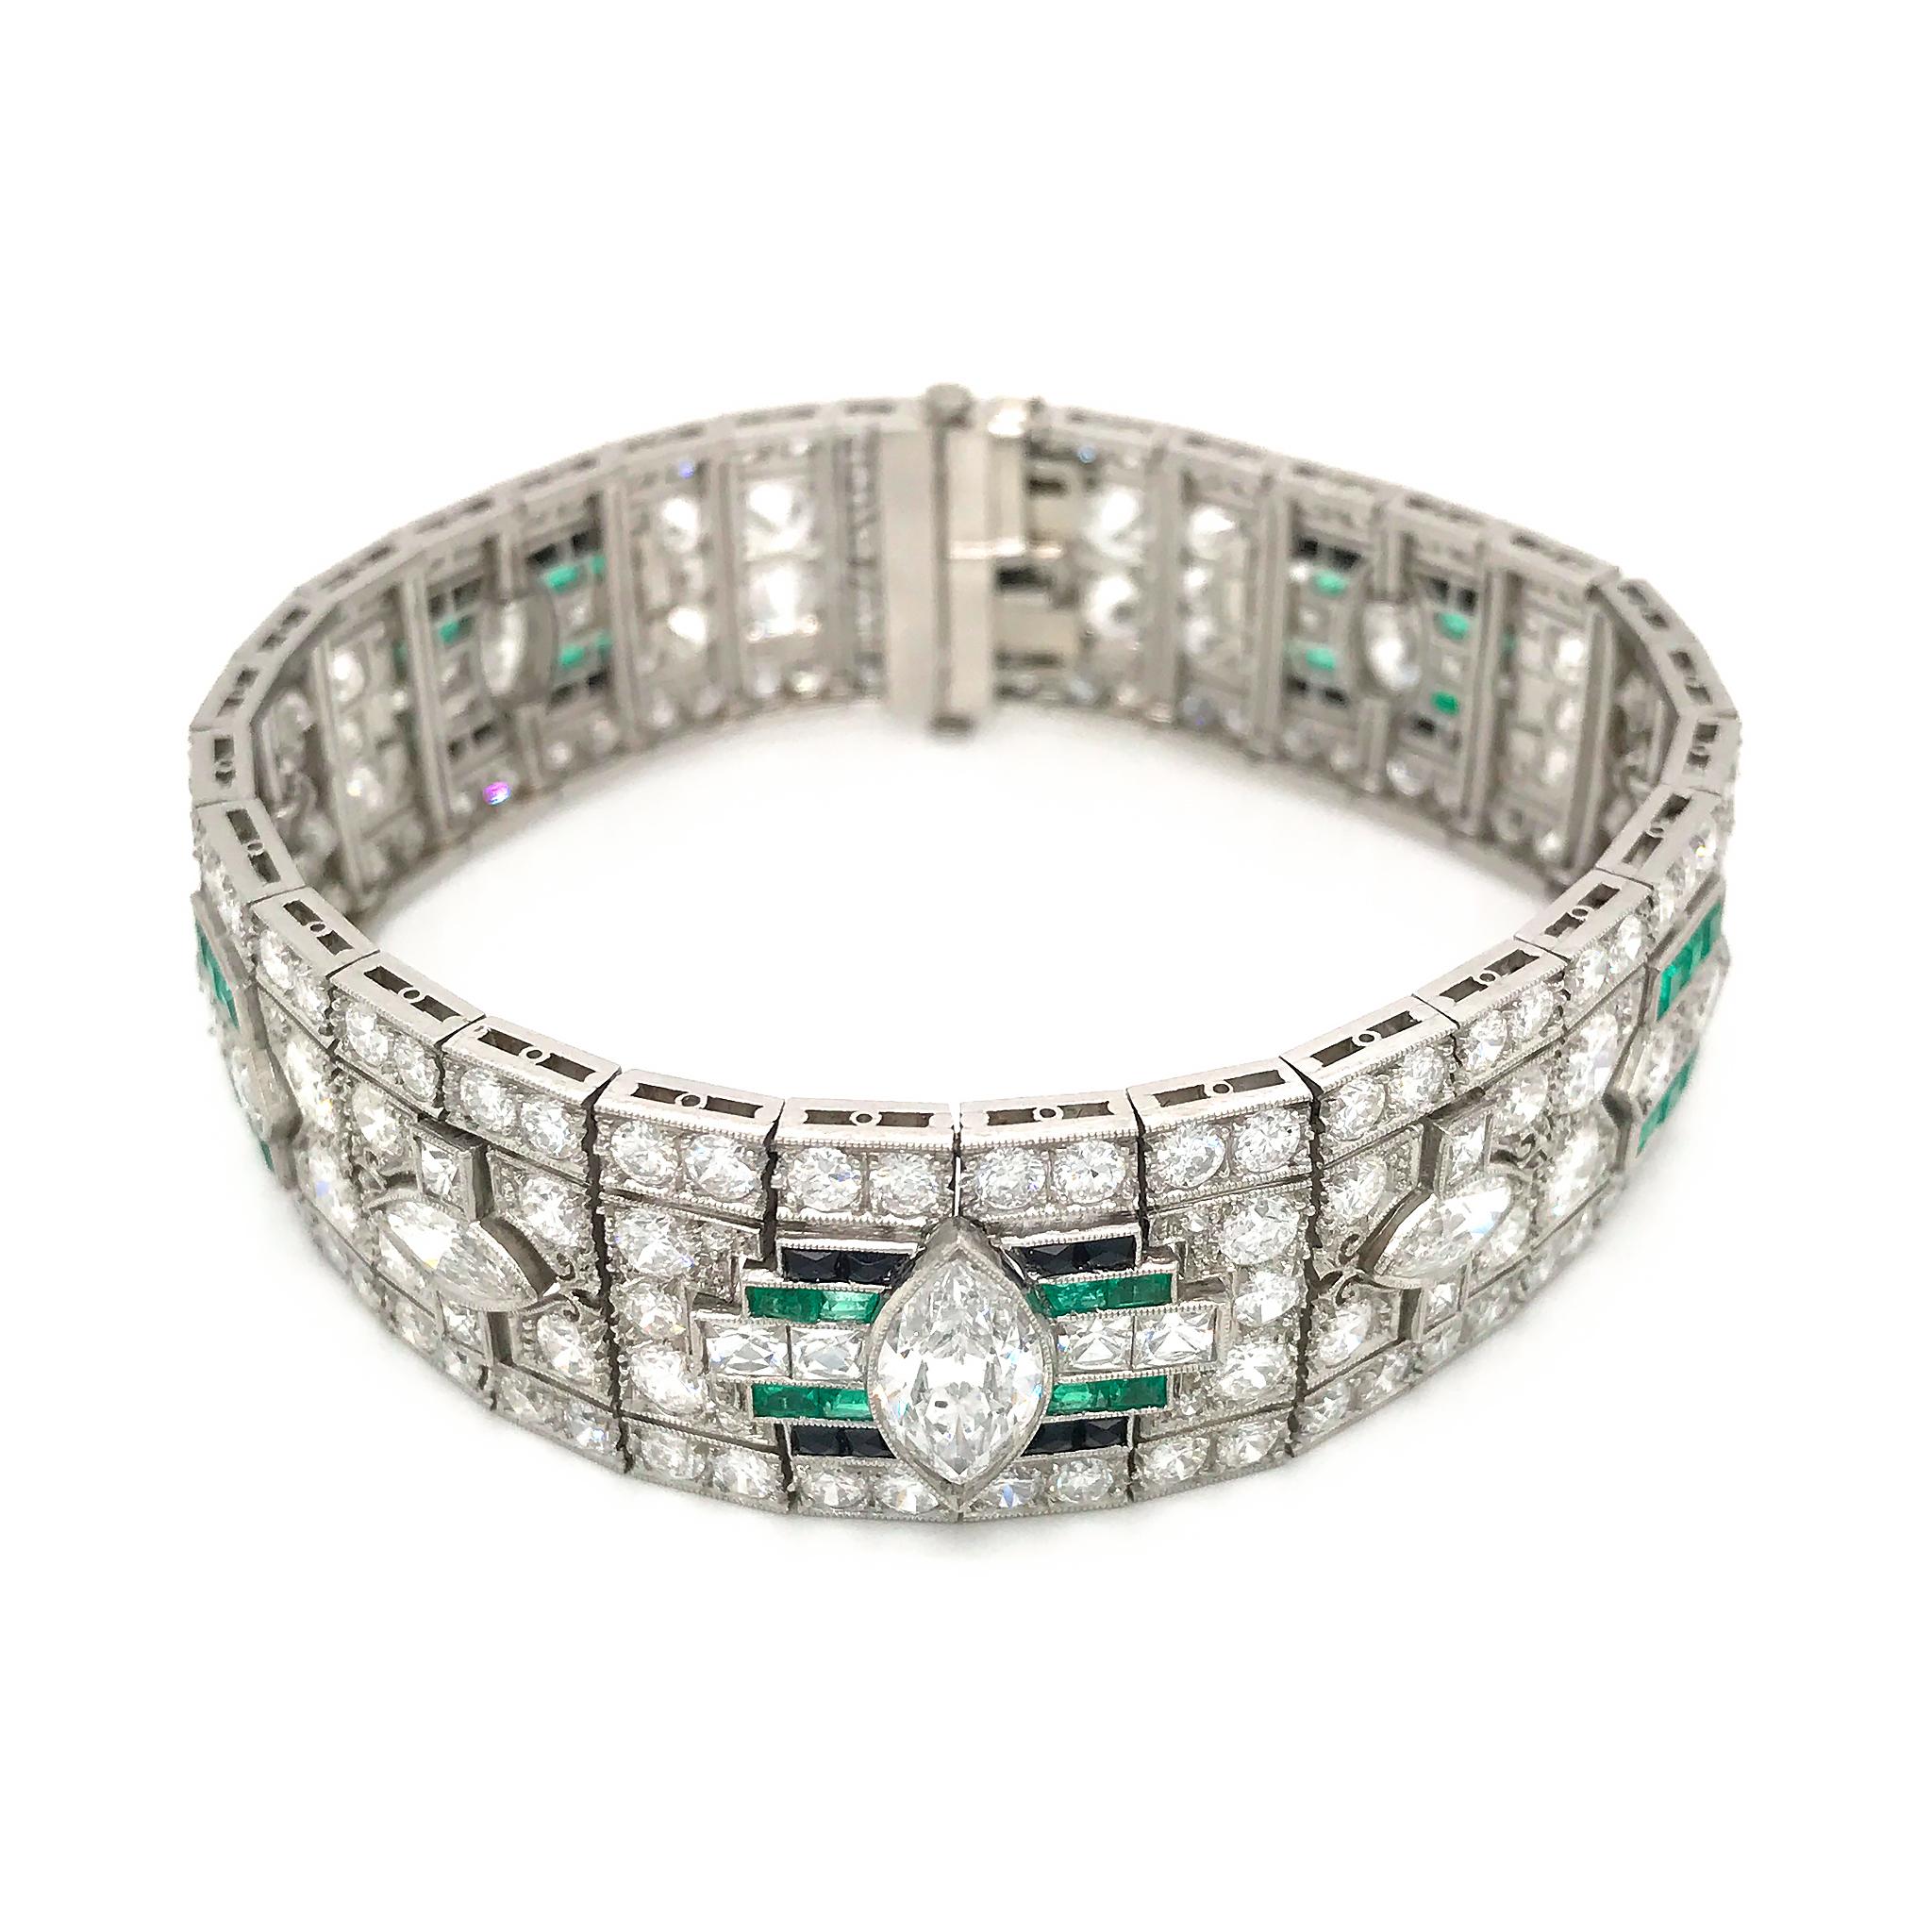 Art Deco Platinum Magnificent Emerald and Diamond 1917 to 1925 Bracelet

An exceptional Art Deco creation, this platinum bracelet features vibrant green emerald gemstones, onyx, in an exquisite pattern of 7 brilliant marquise and 218 old euro round